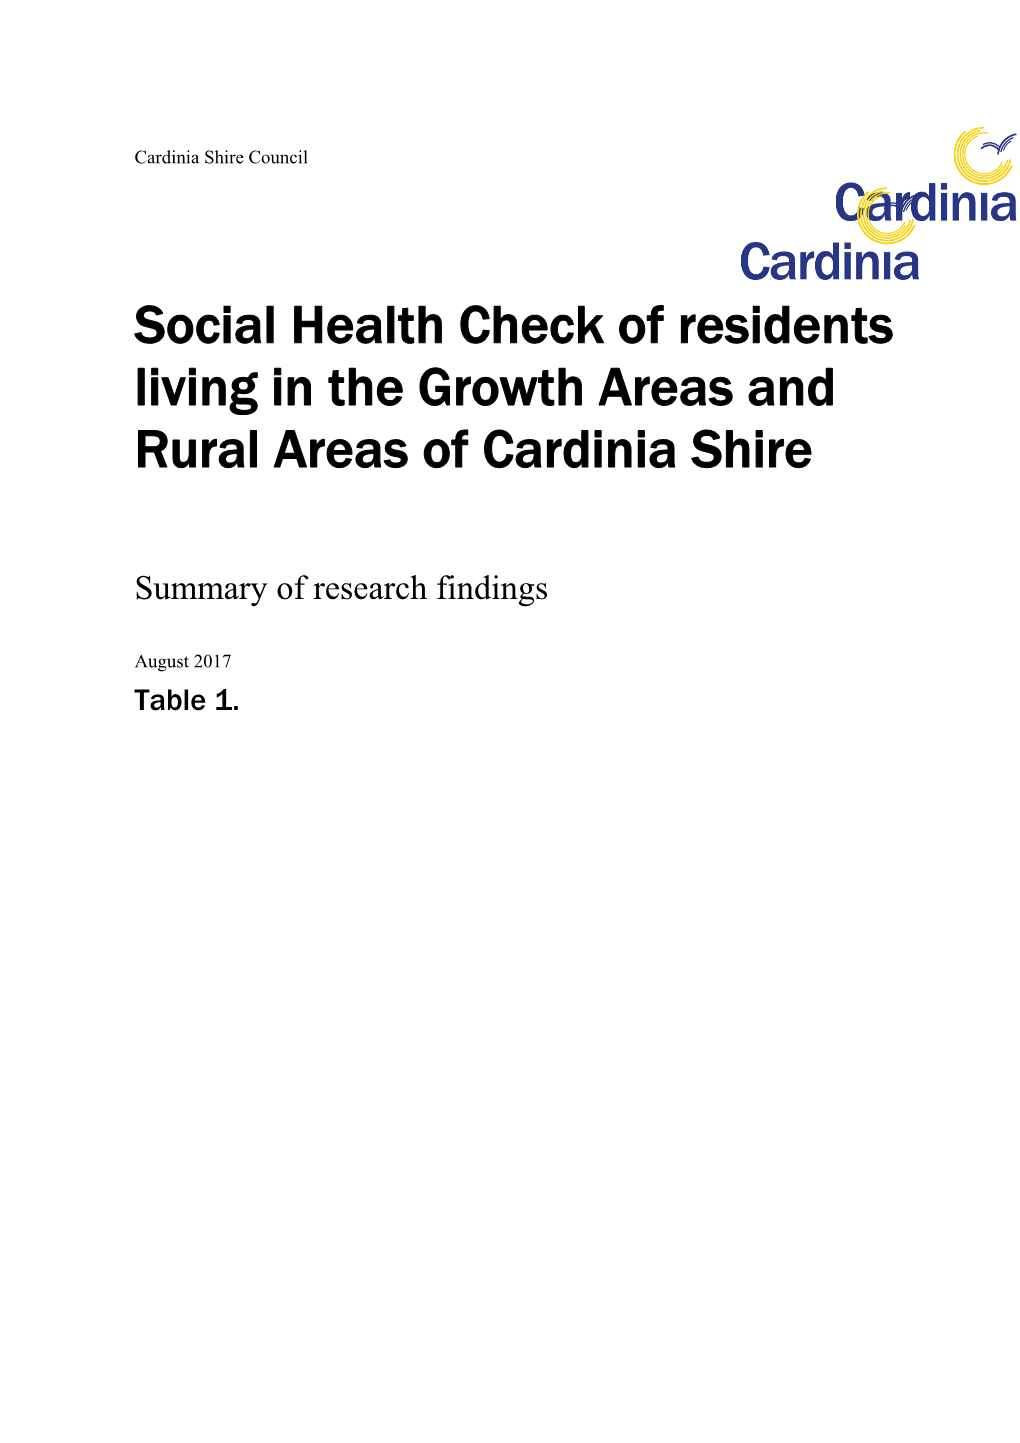 Social Health Check Research